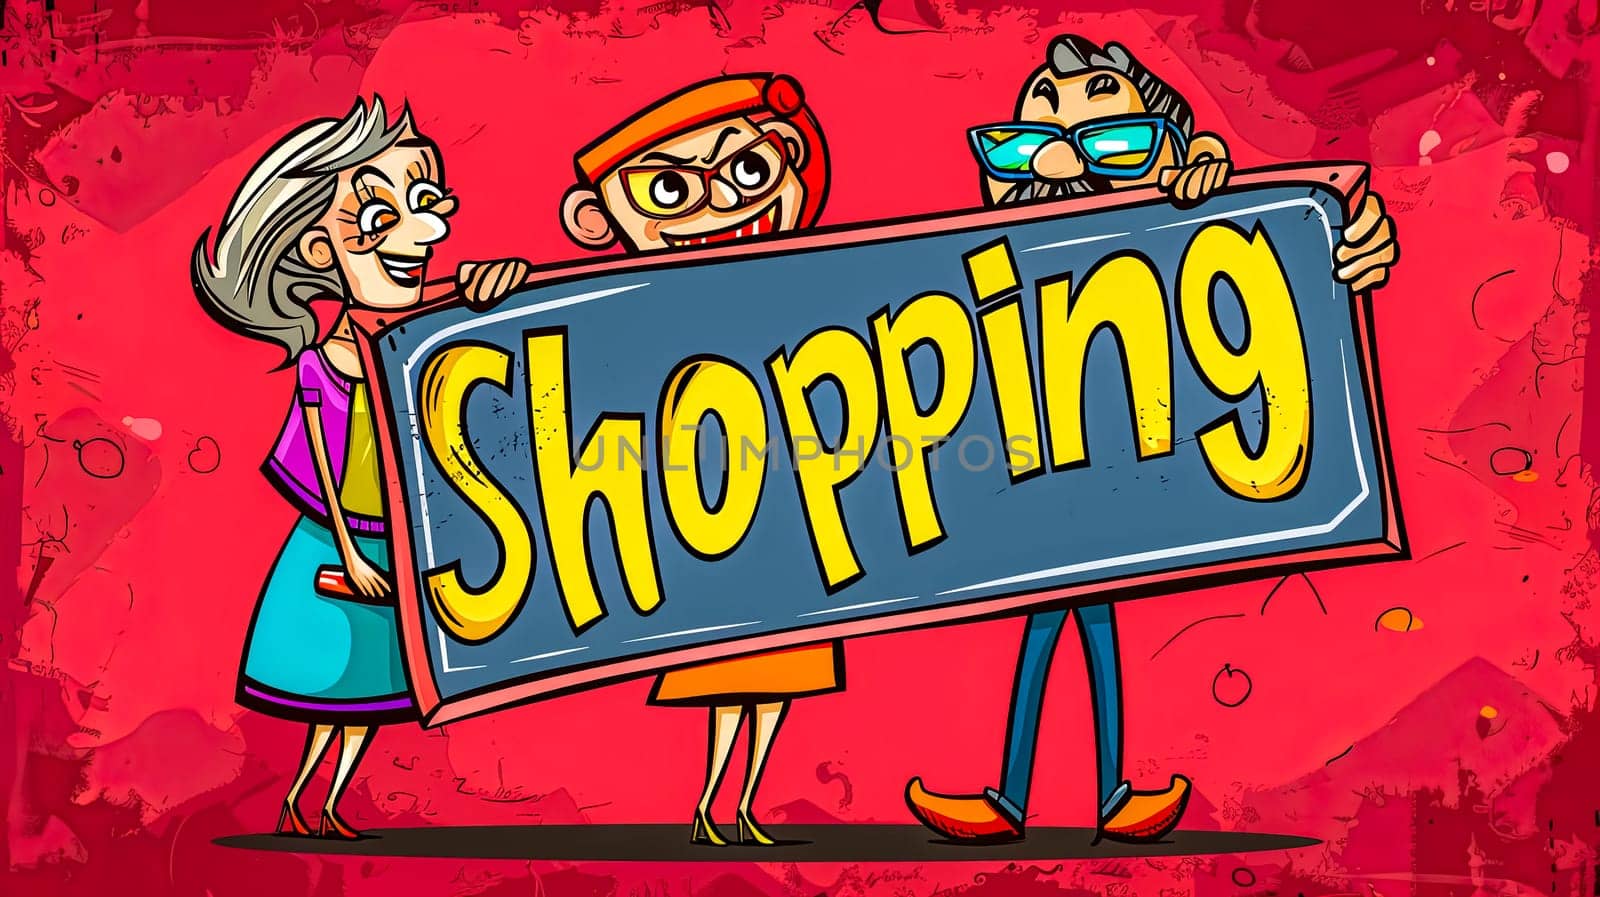 Colorful cartoon shoppers holding a shopping sign by Edophoto